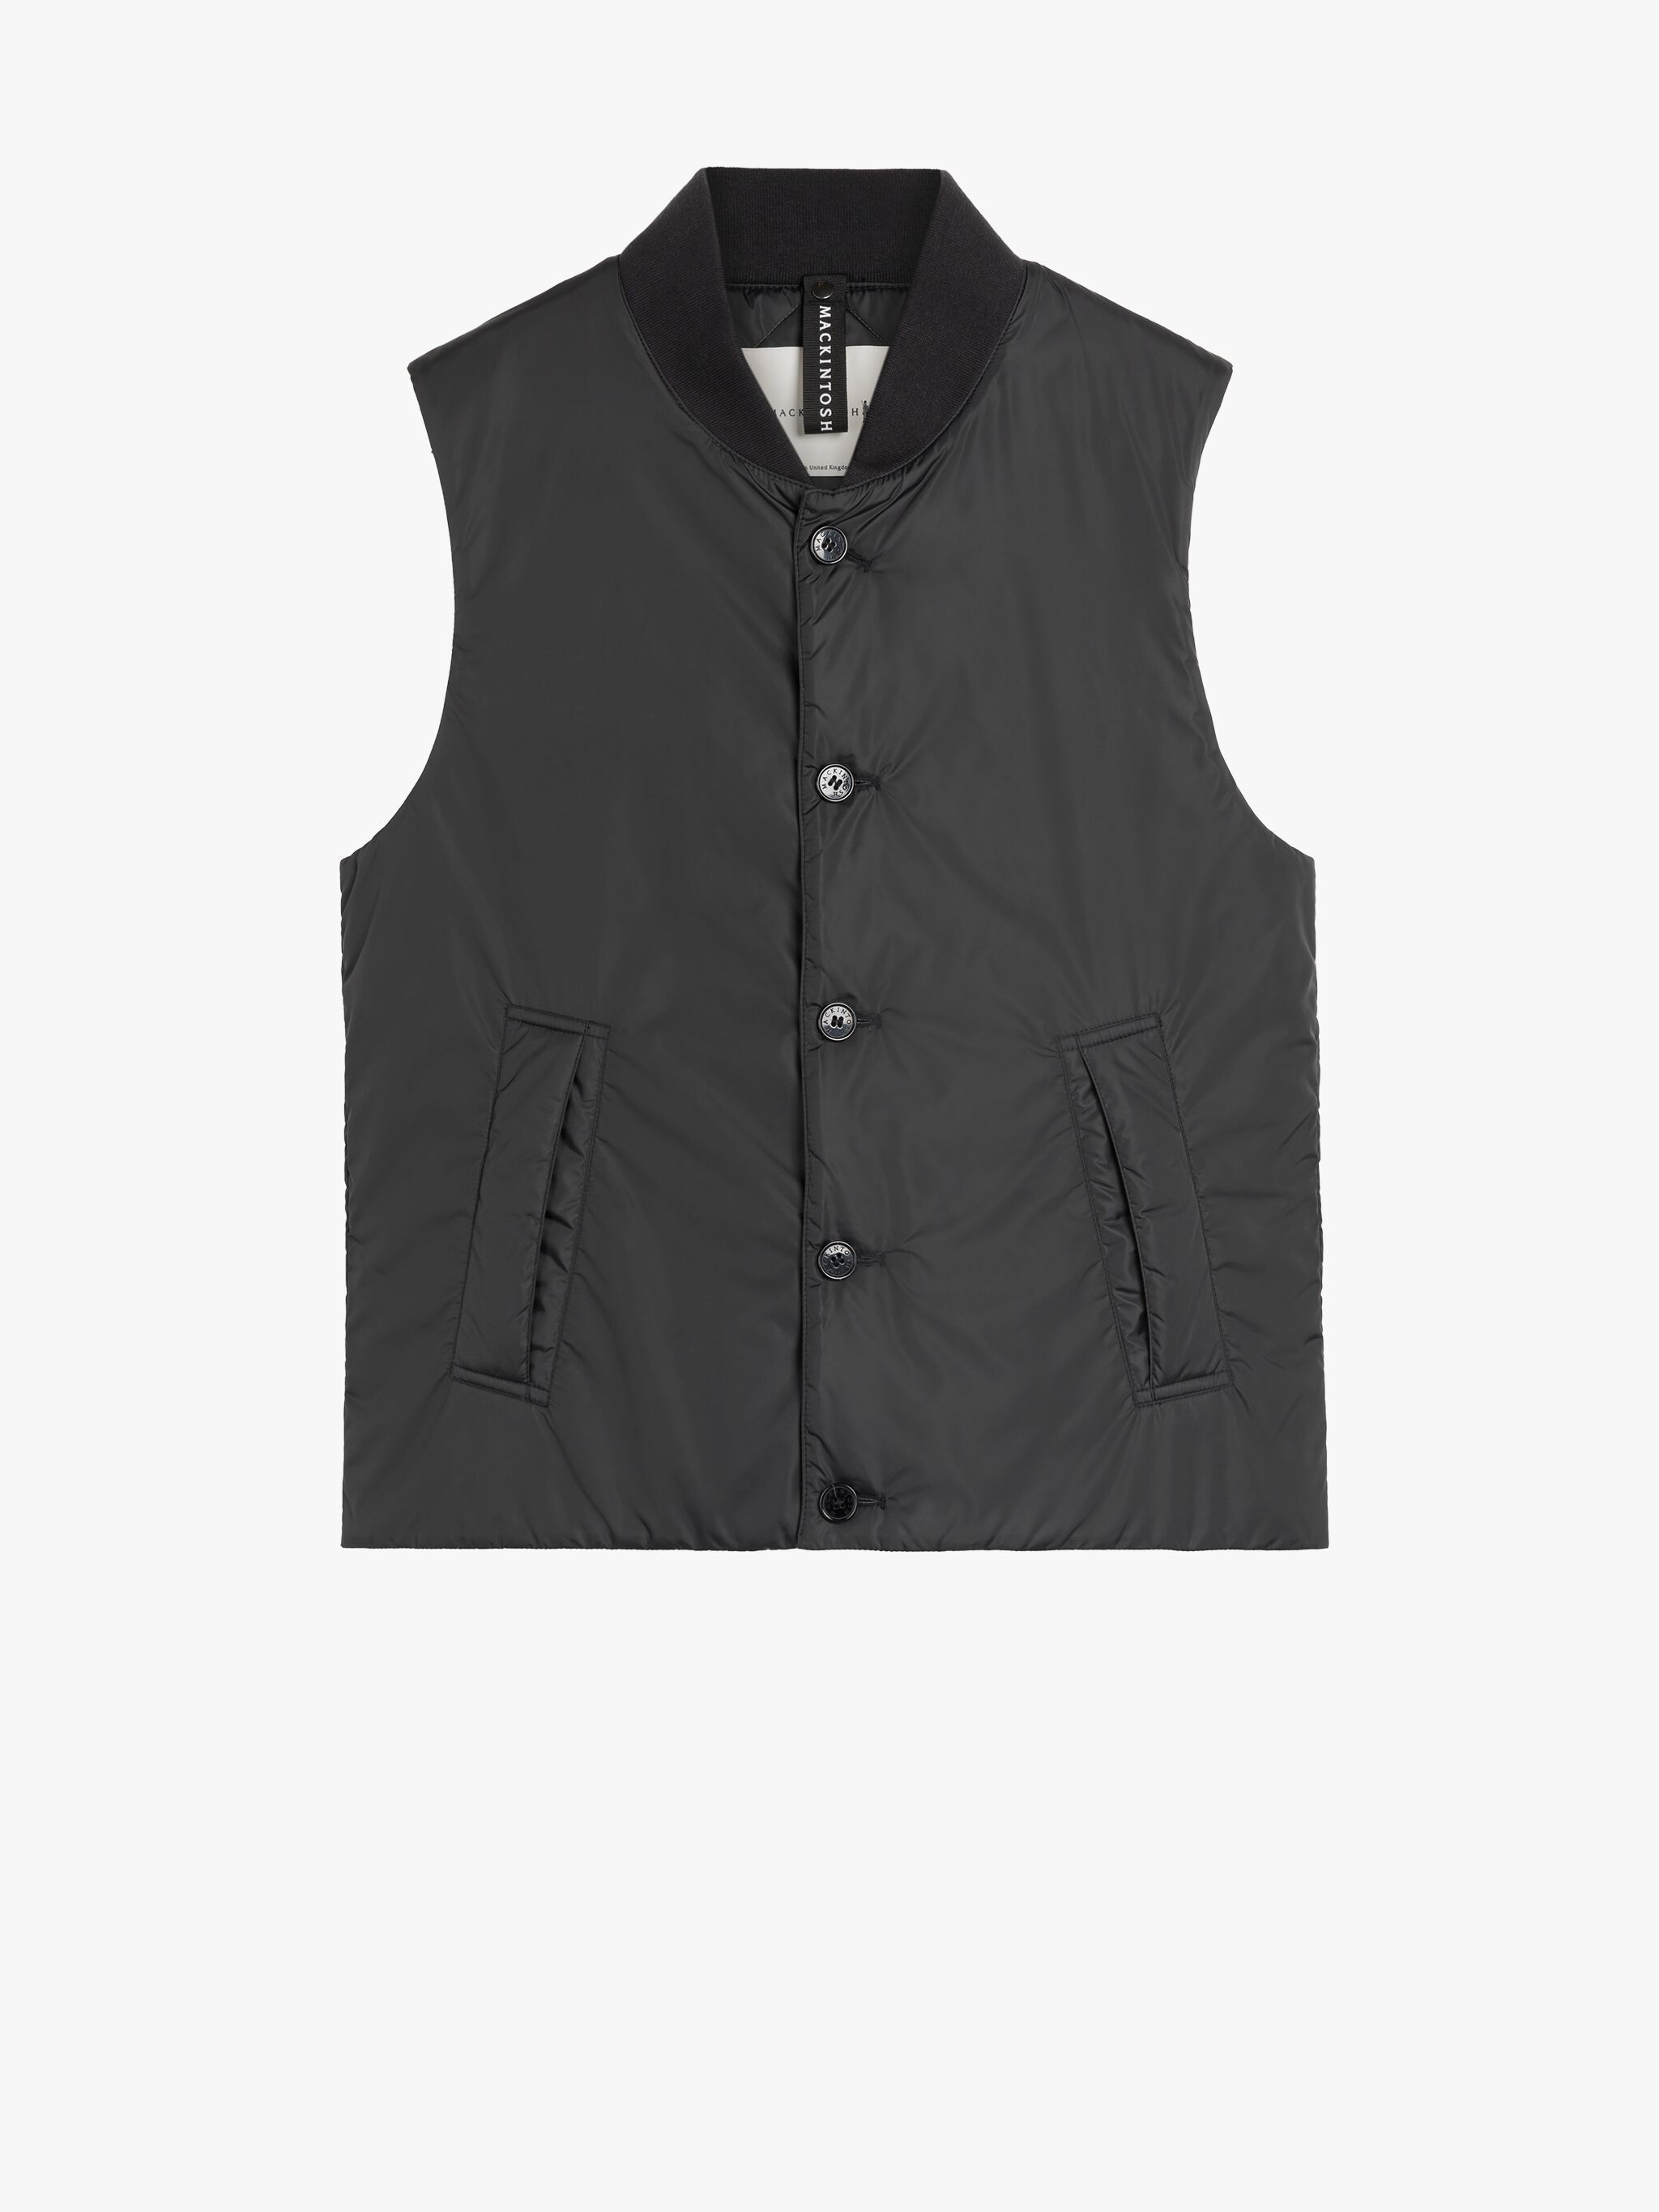 NEW DUNDEE CHARCOAL NYLON LINER VEST - 1